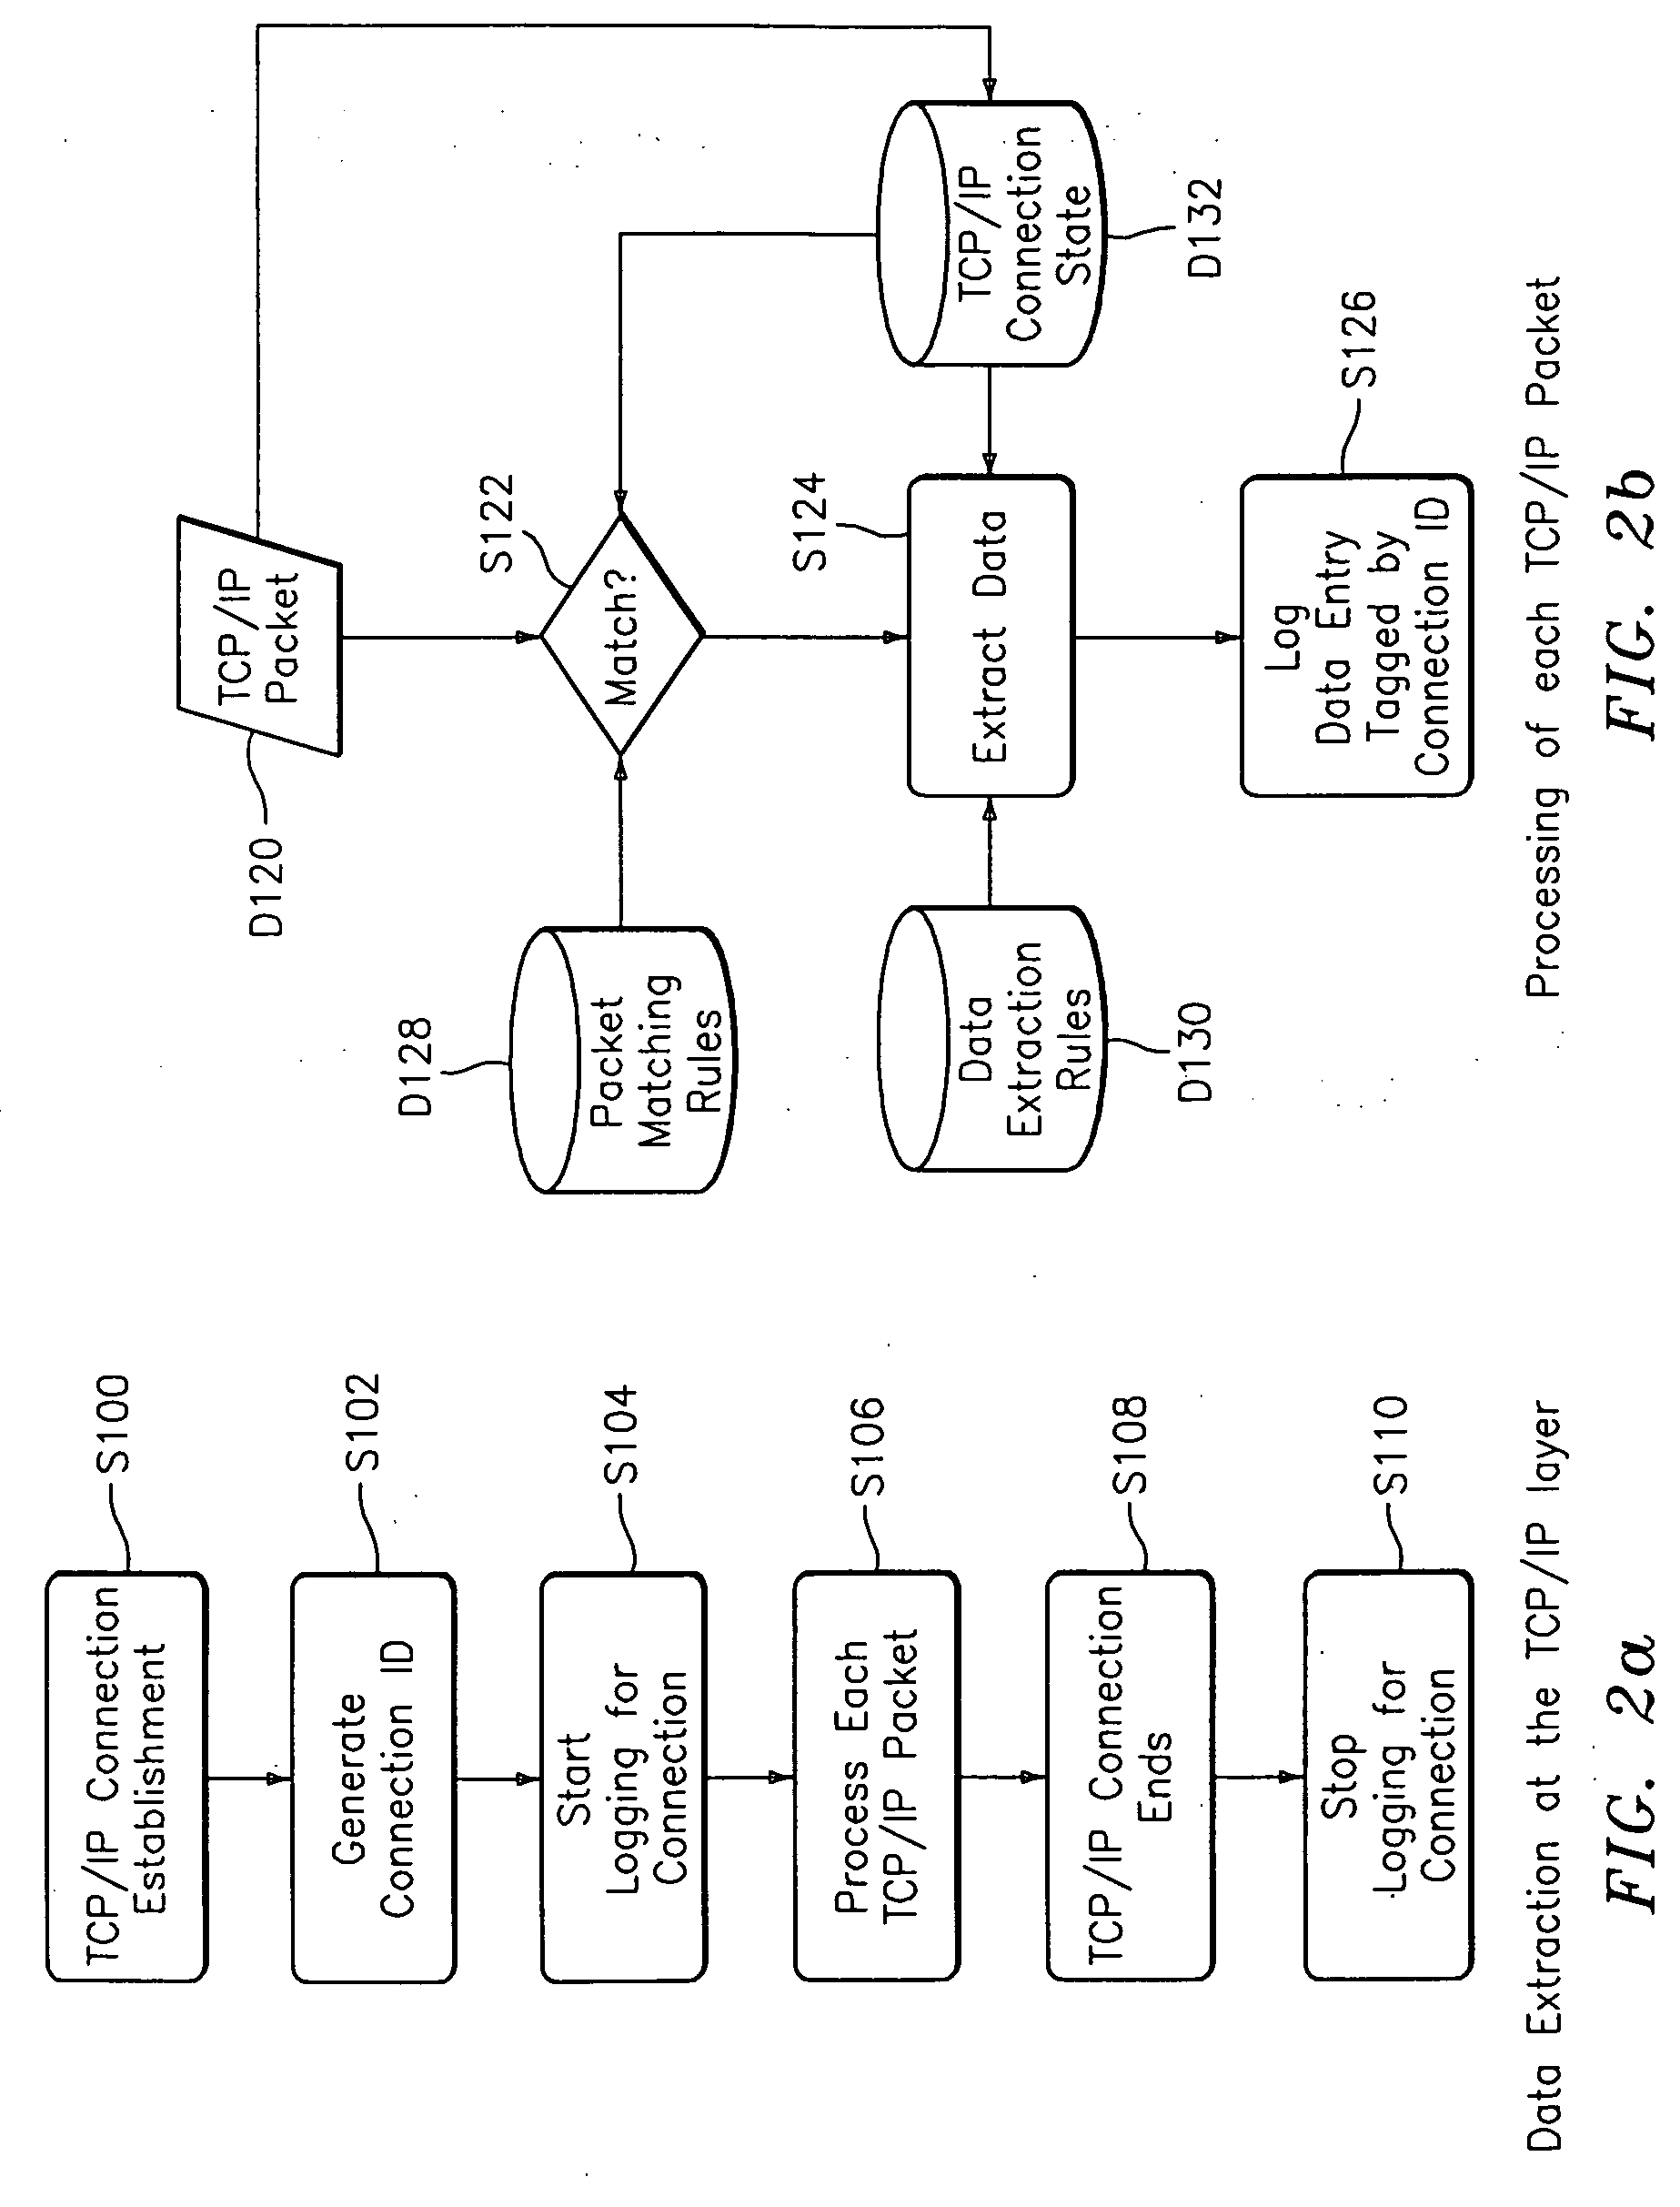 Method and apparatus to estimate client perceived response time